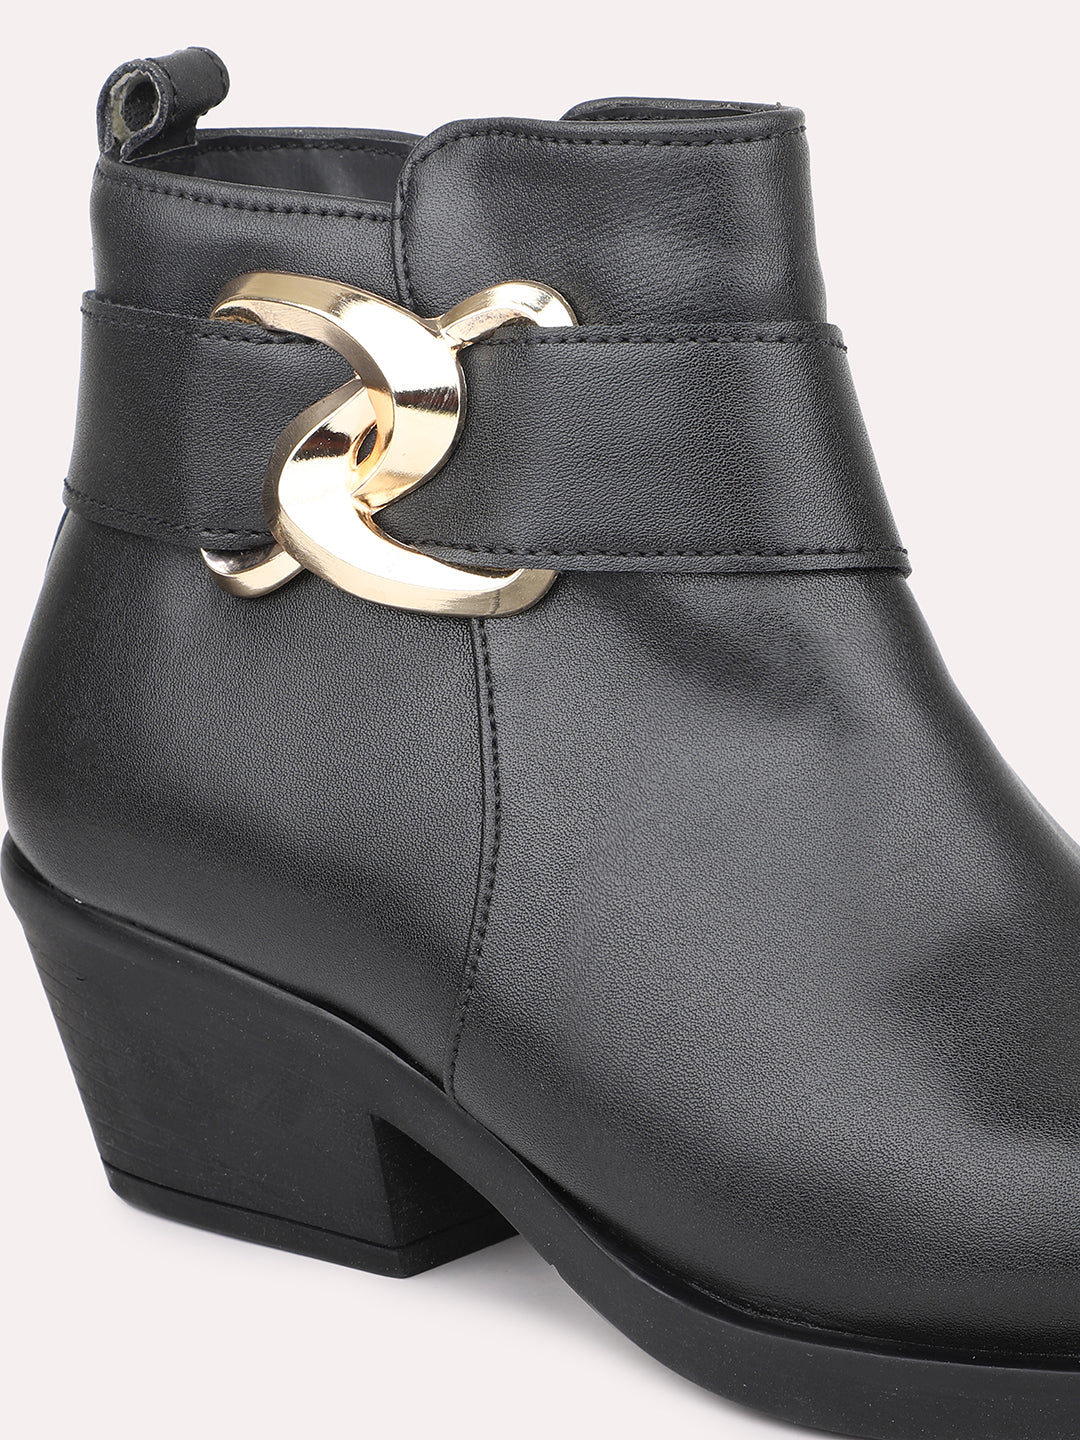 Women Black Mid Top Block Heel Chunky Boots With Buckle Detail